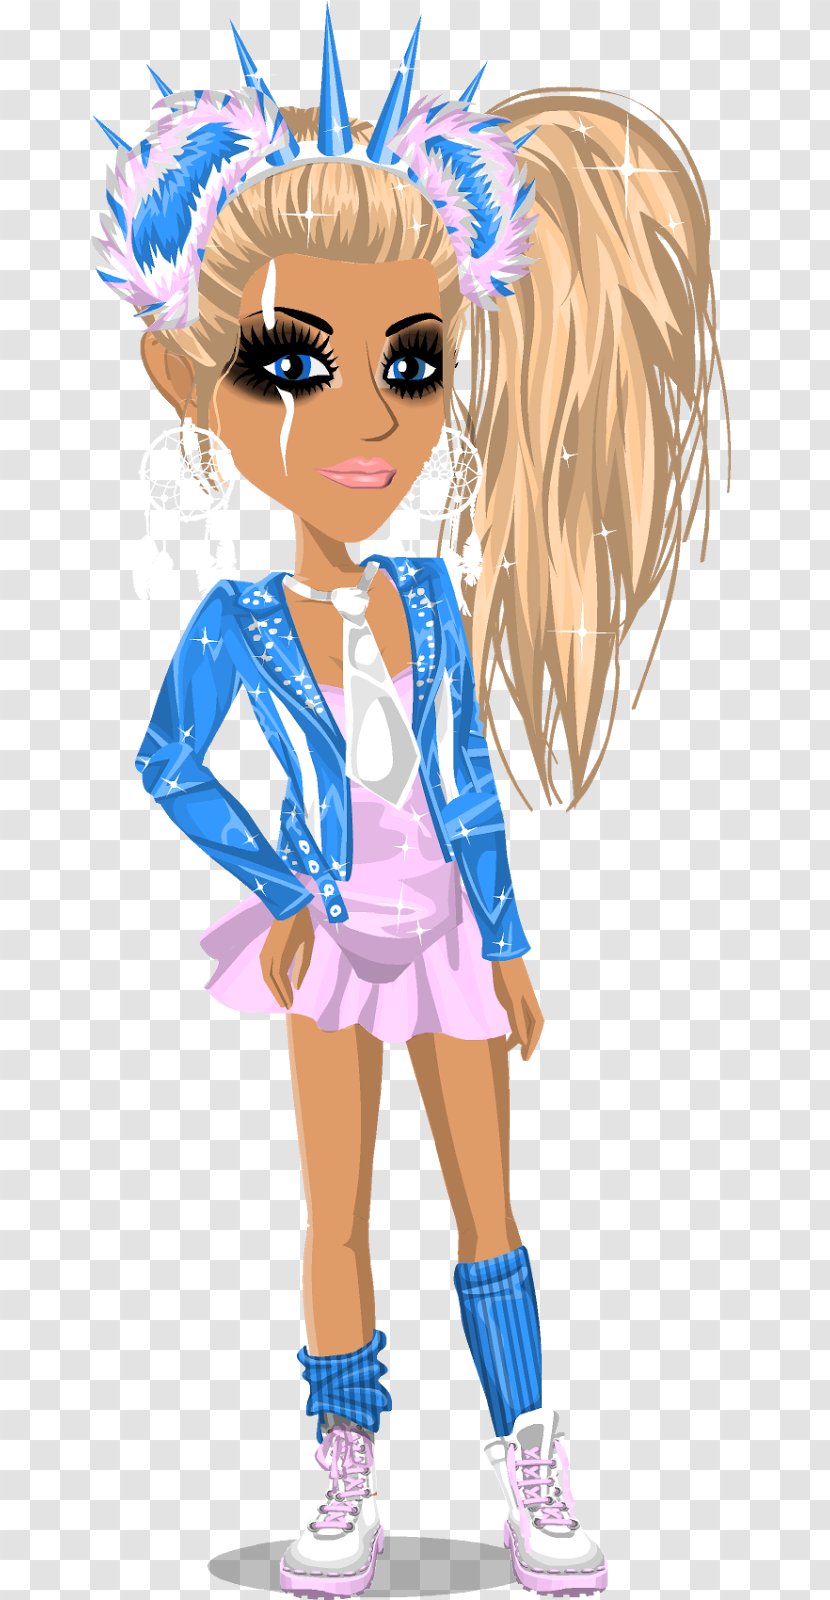 MovieStarPlanet Clothing Android Game - Heart - Msp Transparent PNG